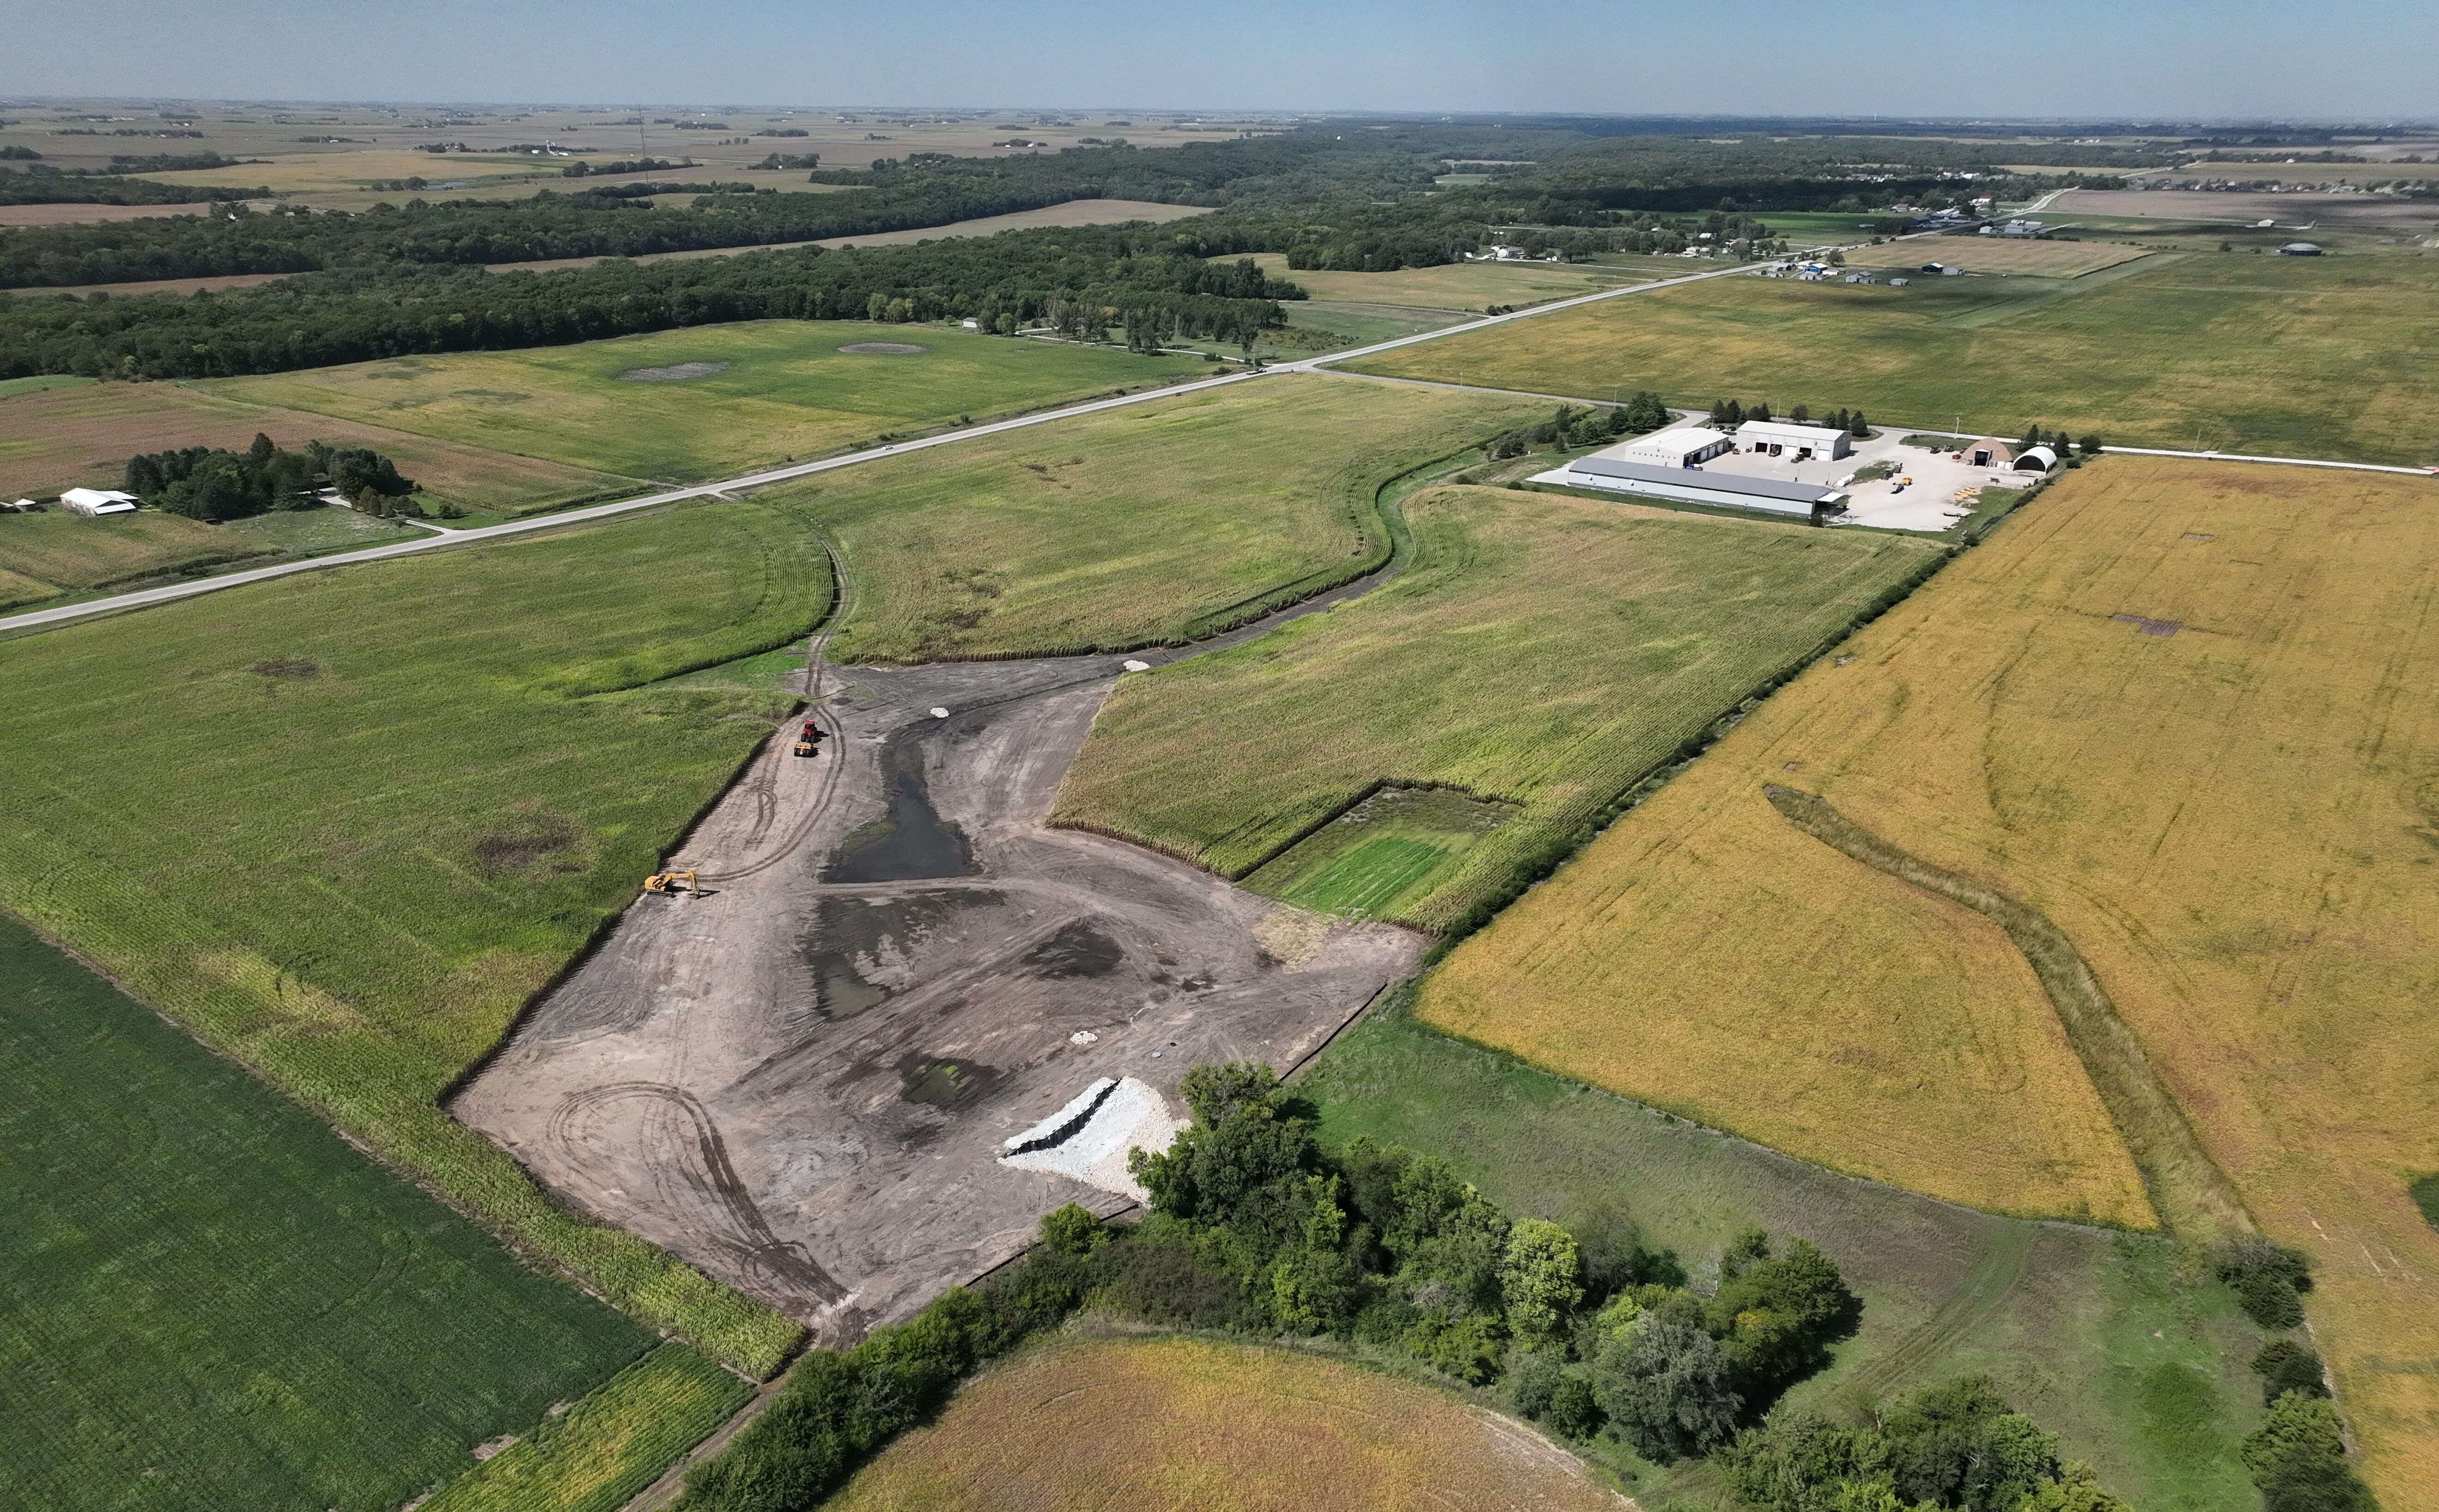 A wetland construction site is seen in aerial view. The cleared-out site is surrounded by farmland.